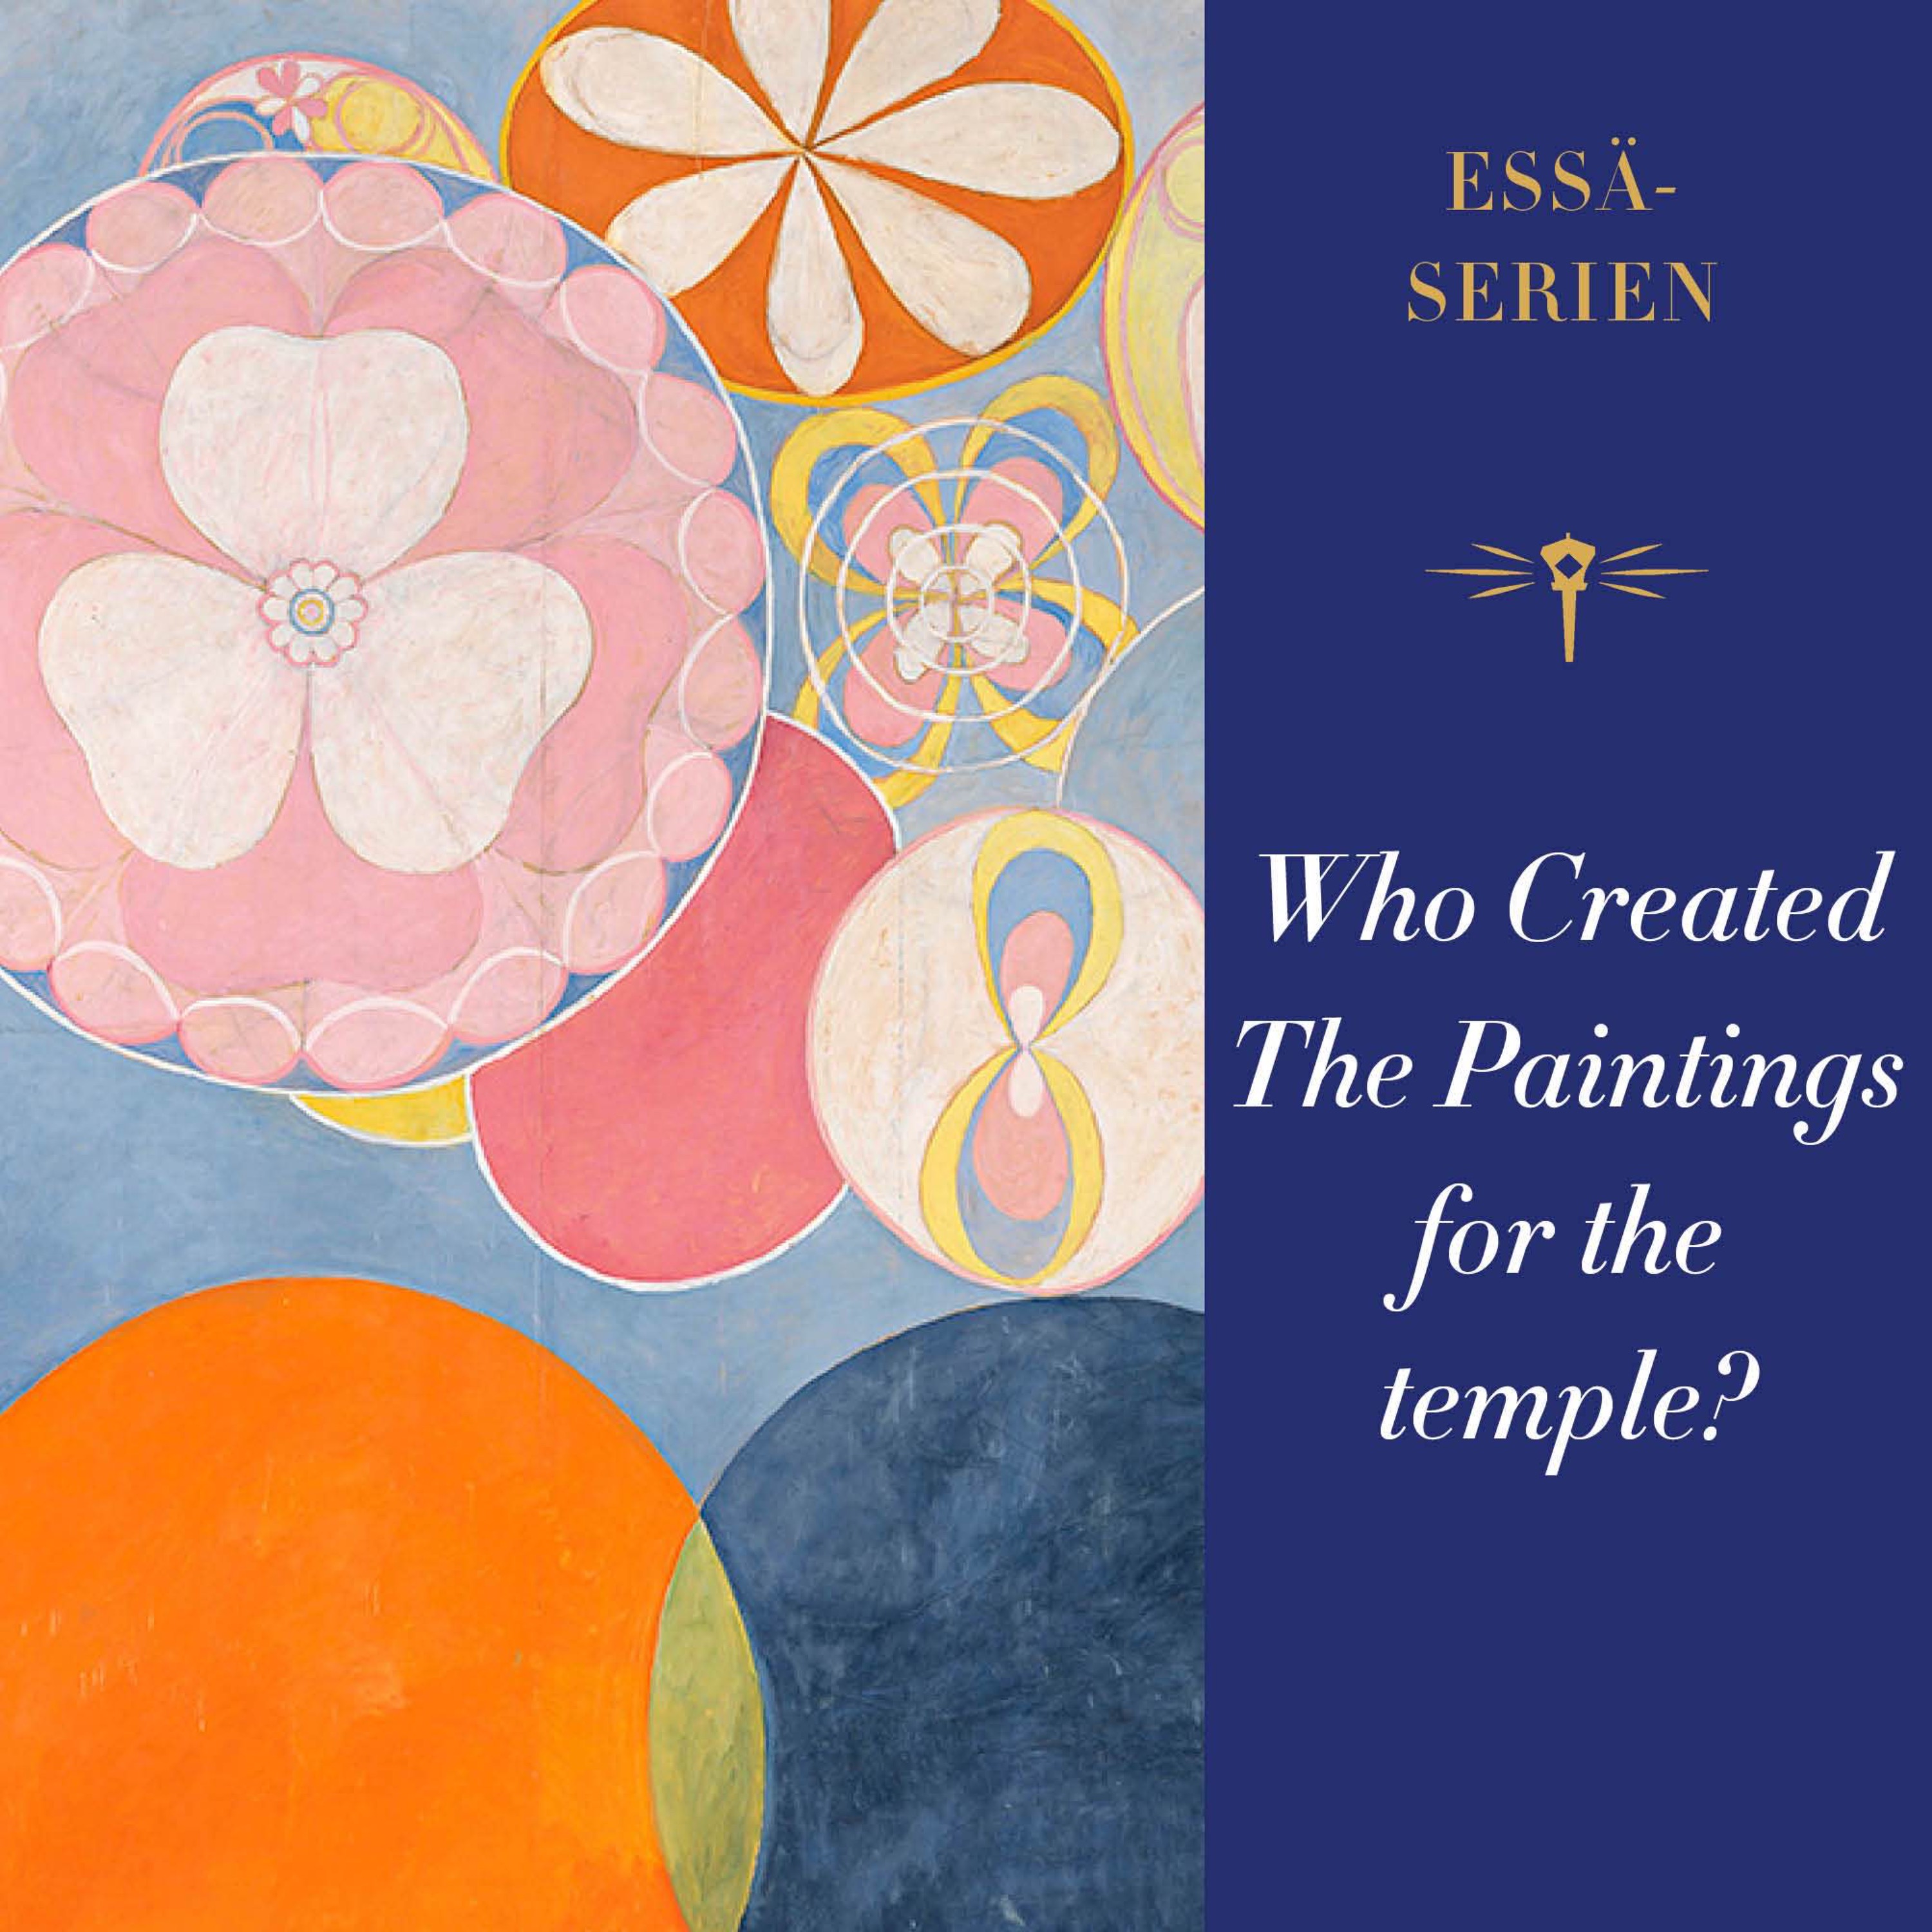 Who Created The Paintings for the temple?